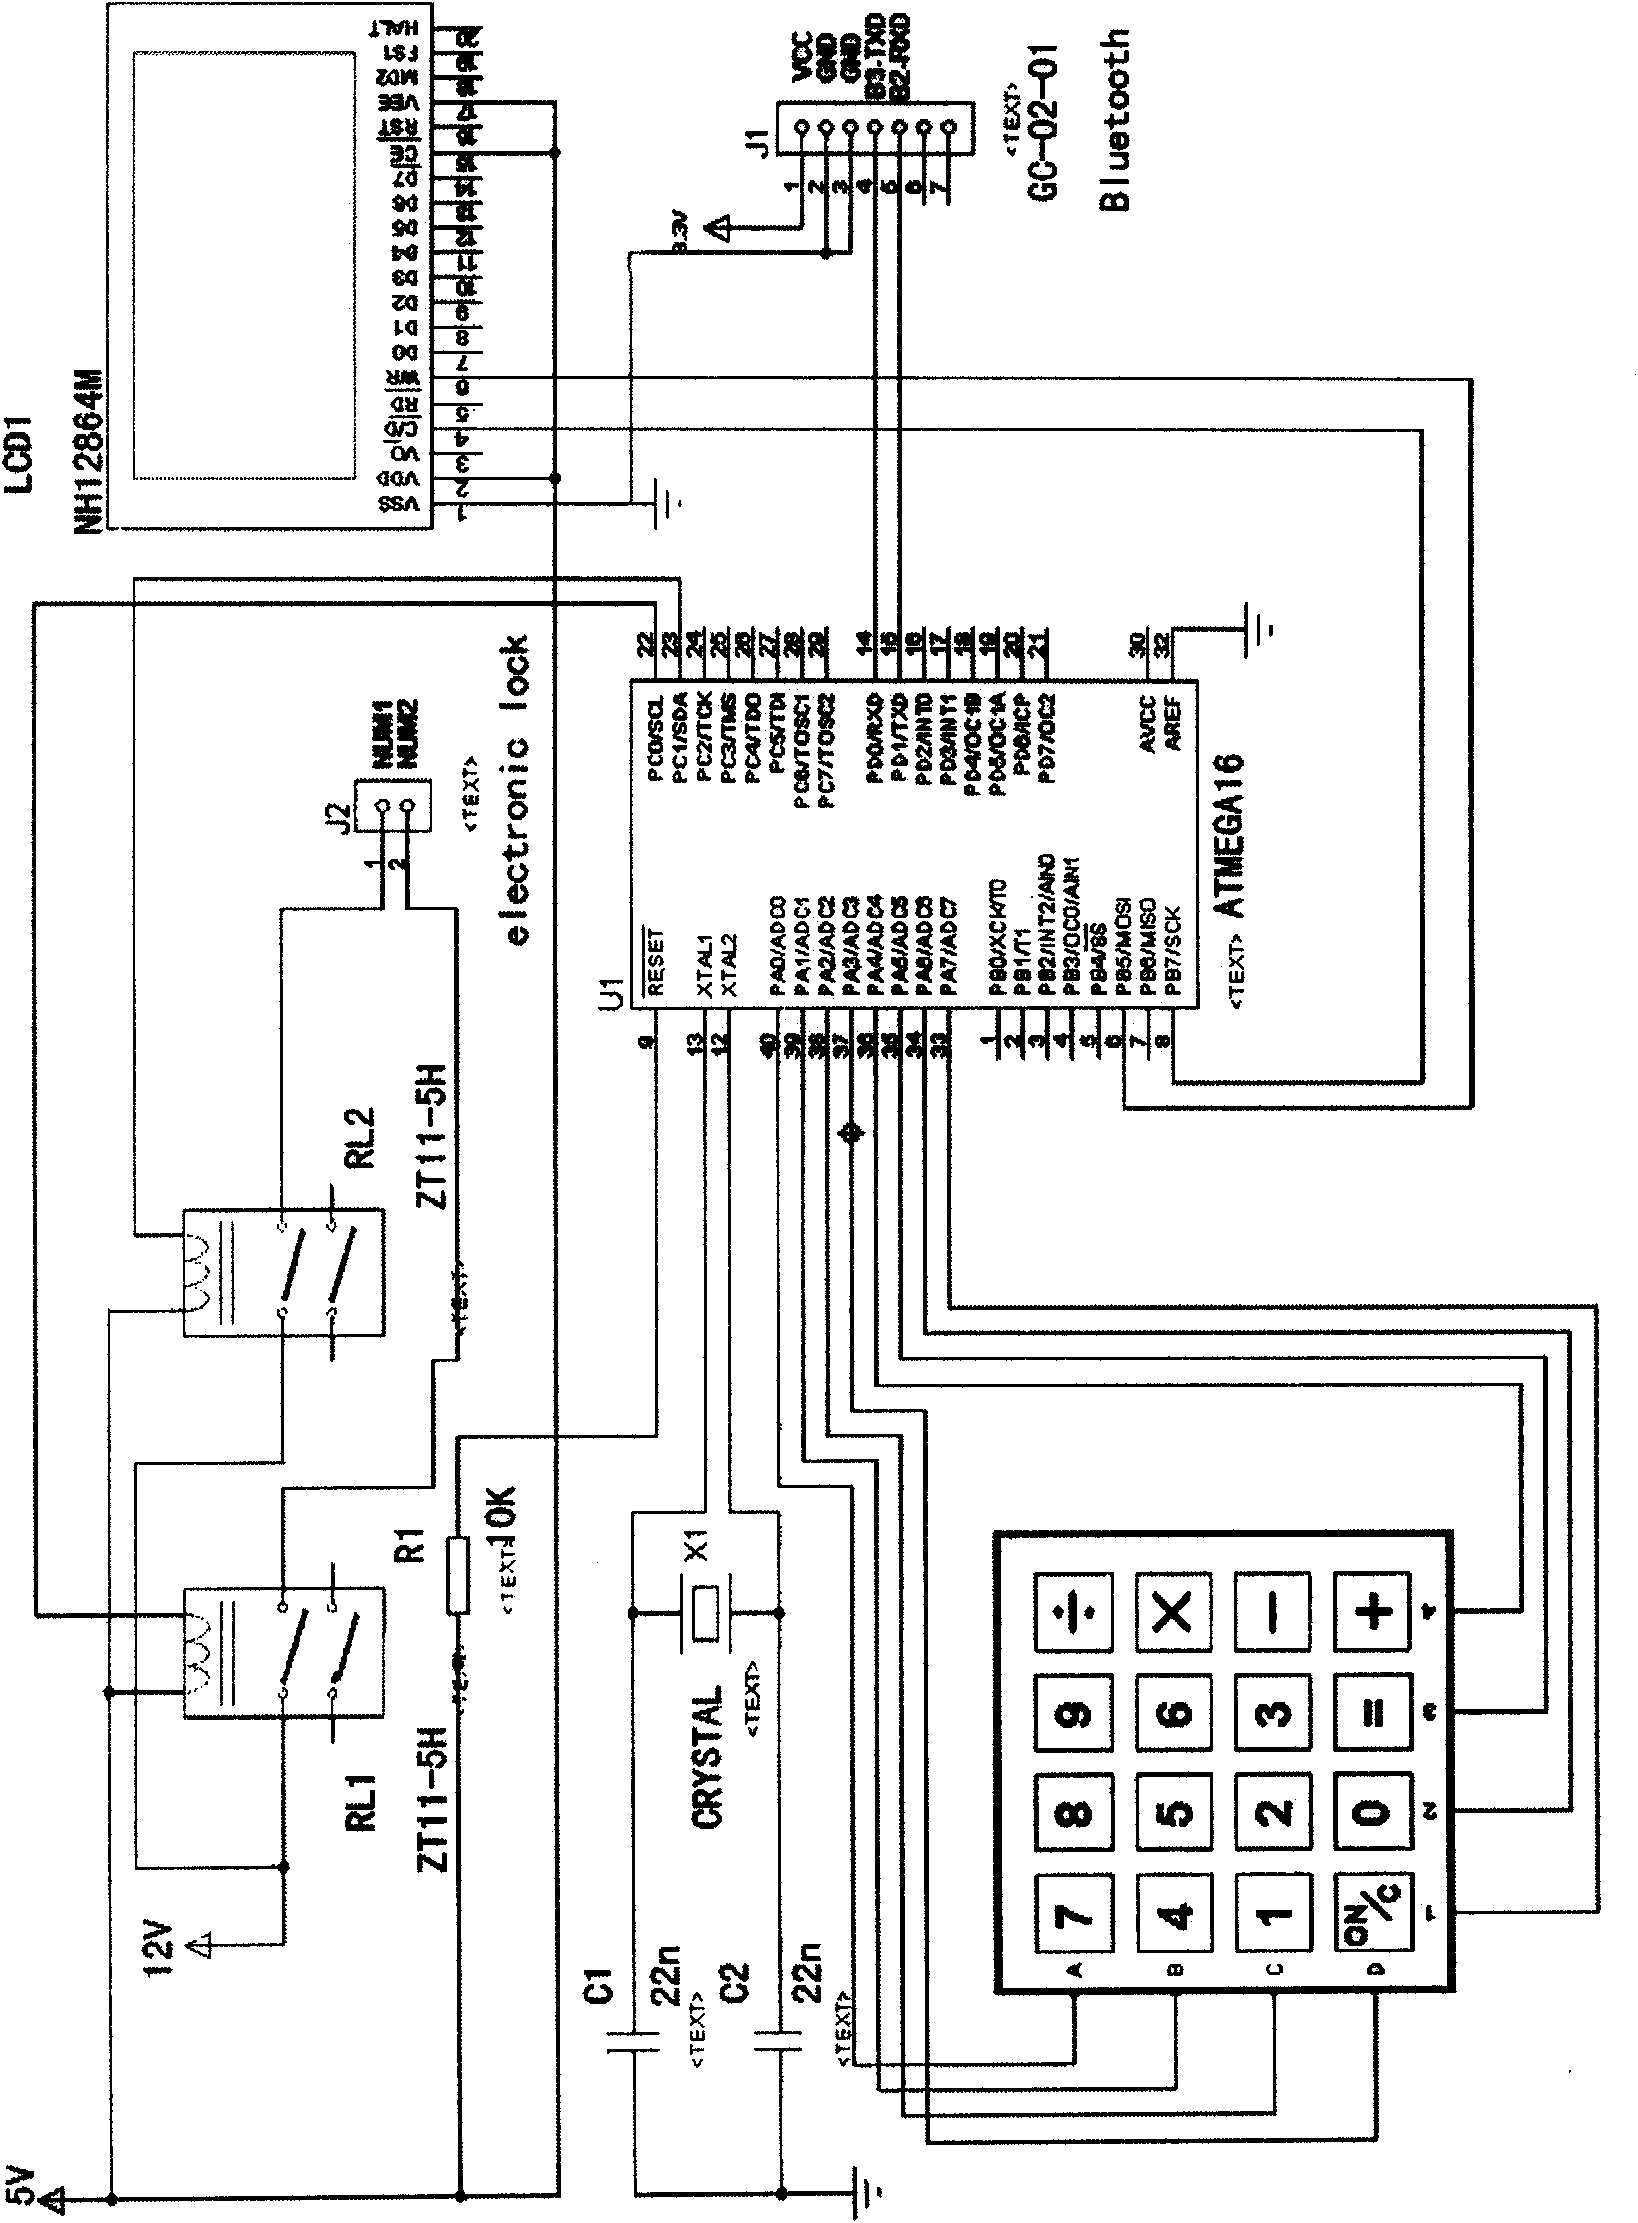 Object register system based on mobile phone Bluetooth